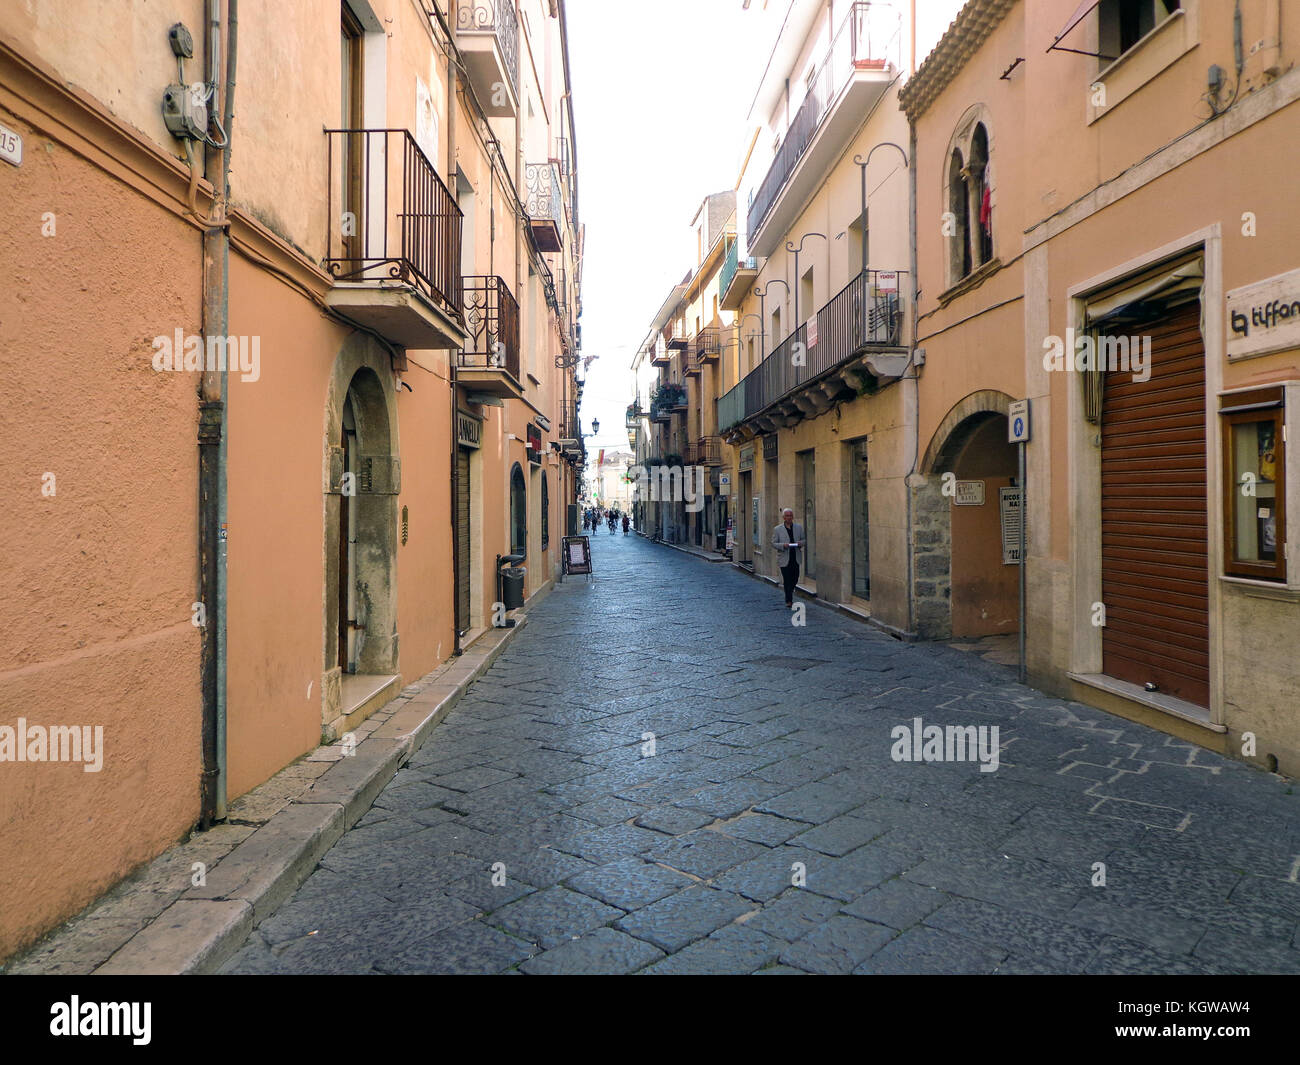 Fondi, Italy - 10 june 2013: Appio Claudio street. Fondi's urban core is located in the south pontino halfway between Rome and Naples. Stock Photo